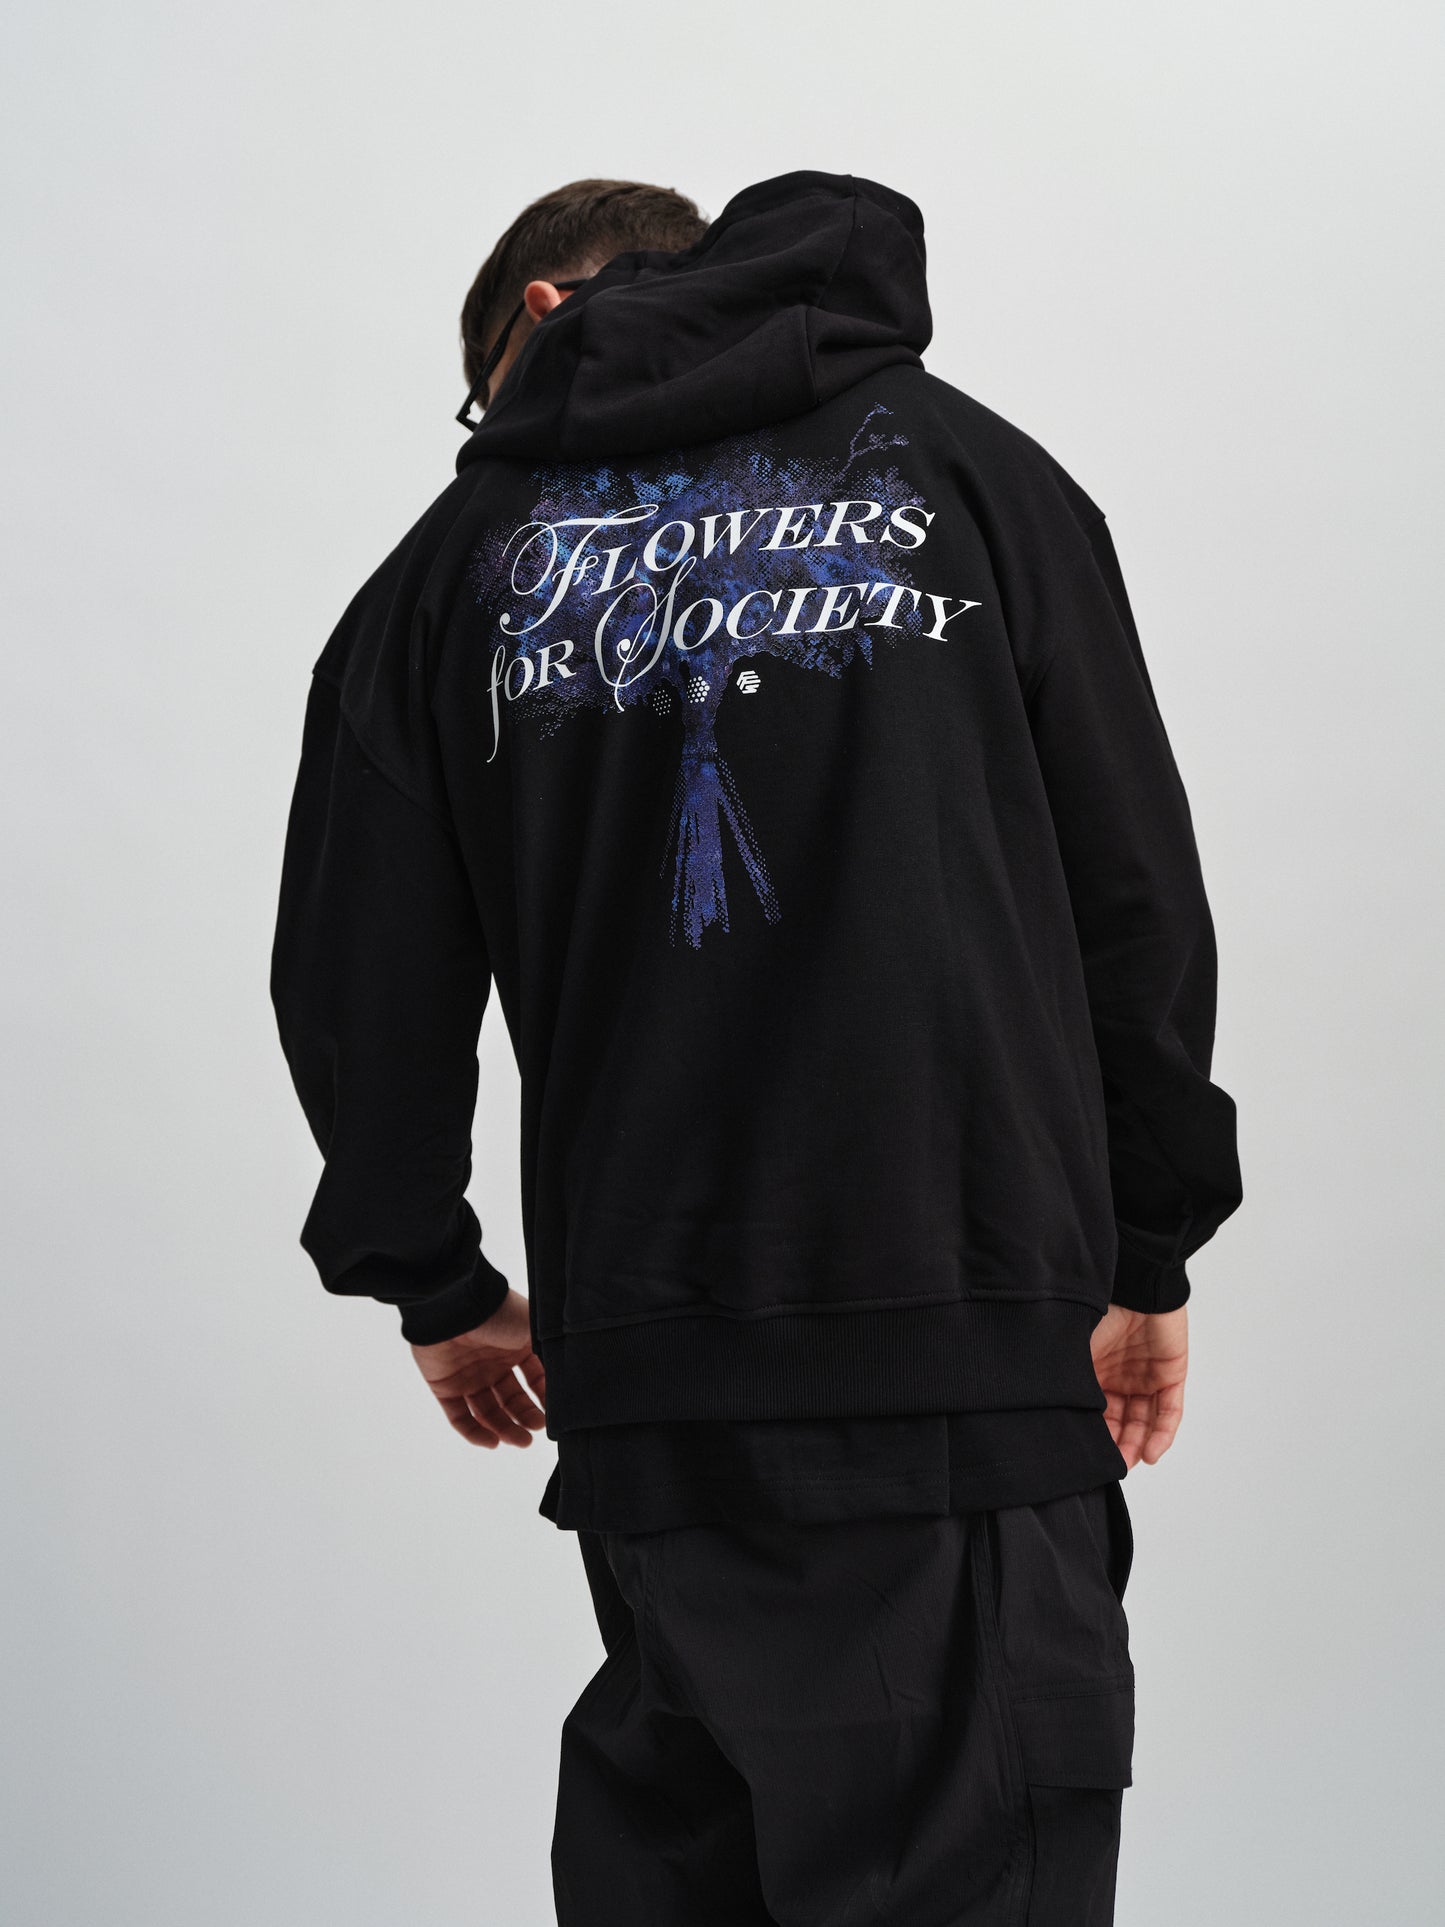 Flowers for Society bouquet hoodie black back view worn by model Angelo